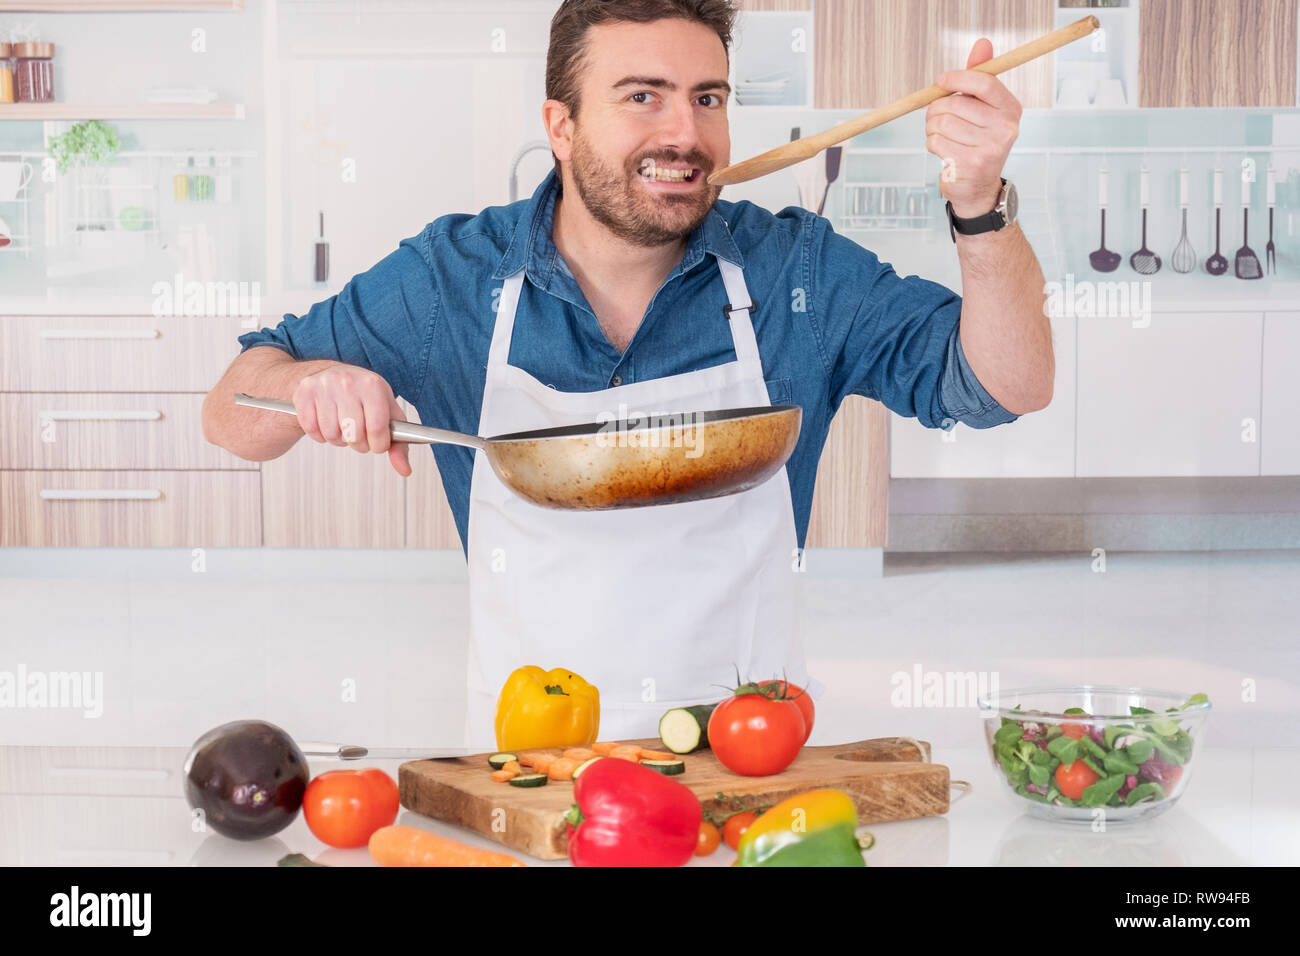 https://c8.alamy.com/comp/RW94FB/cheerful-young-man-tasting-food-while-cooking-at-home-RW94FB.jpg